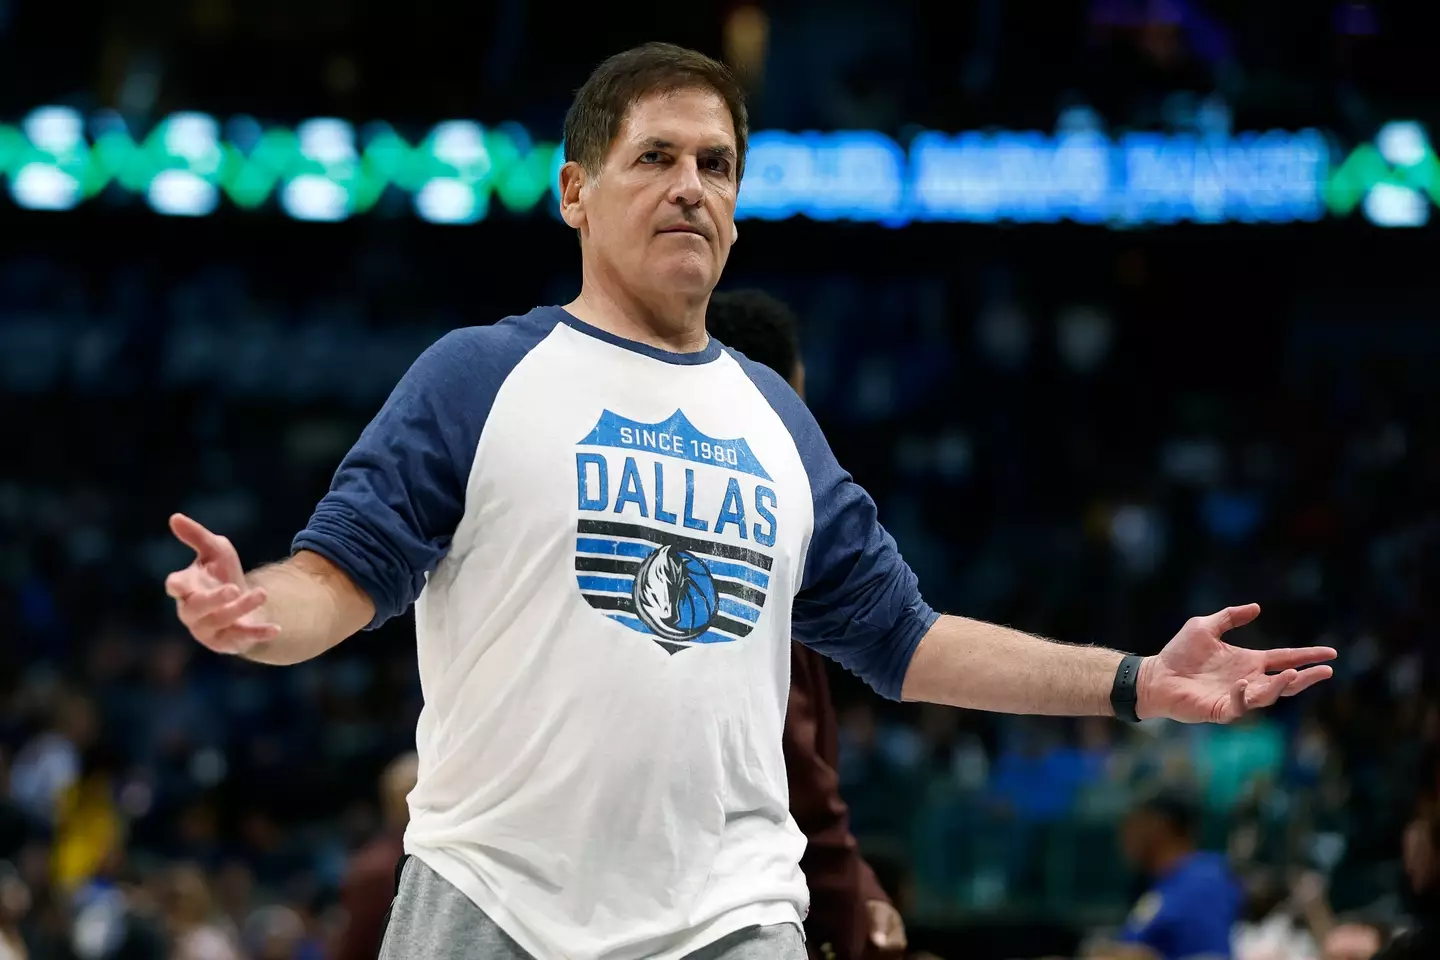 Billionaire Mark Cuban's cash saving tip hasn't gone down well with some people.